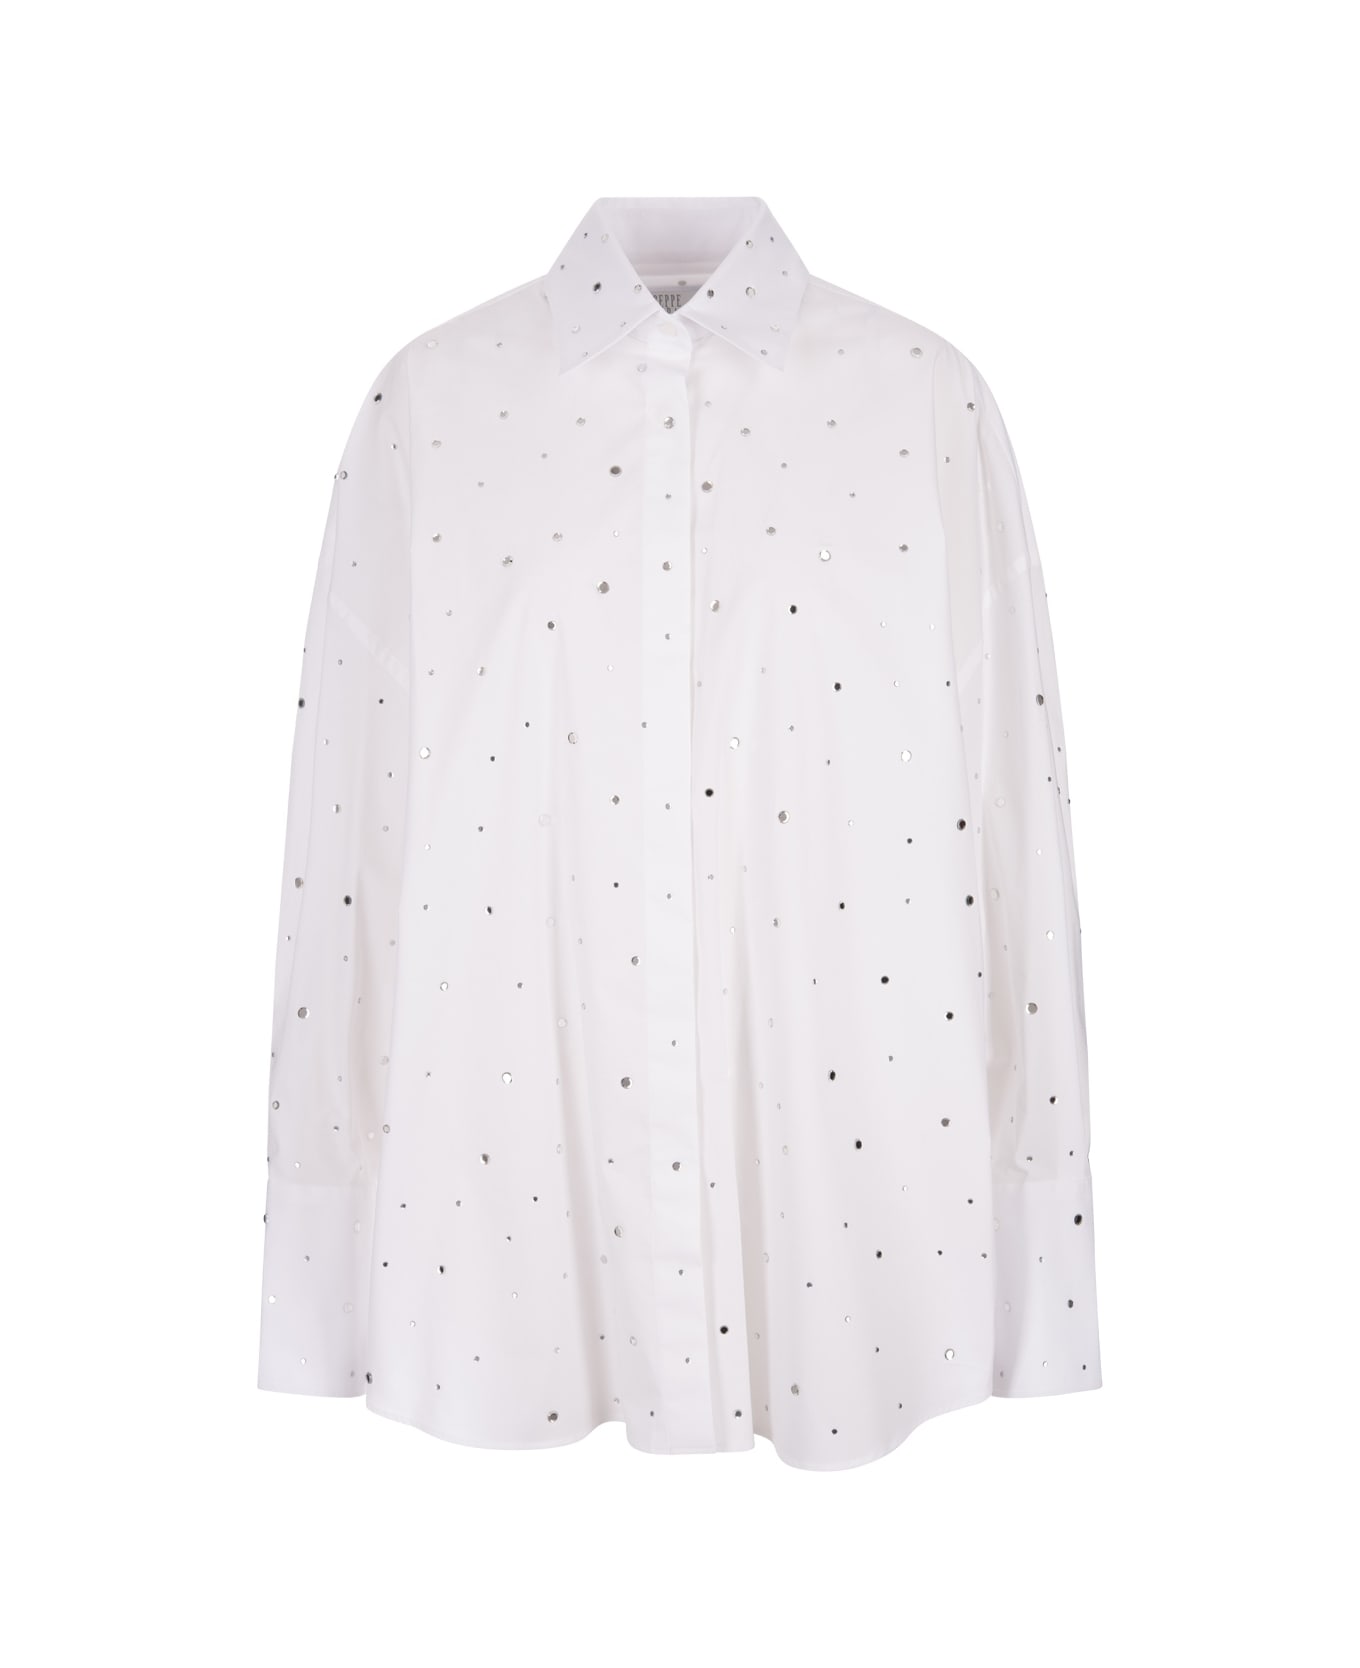 Giuseppe di Morabito White Over Fit Shirt With All-over Stass - White